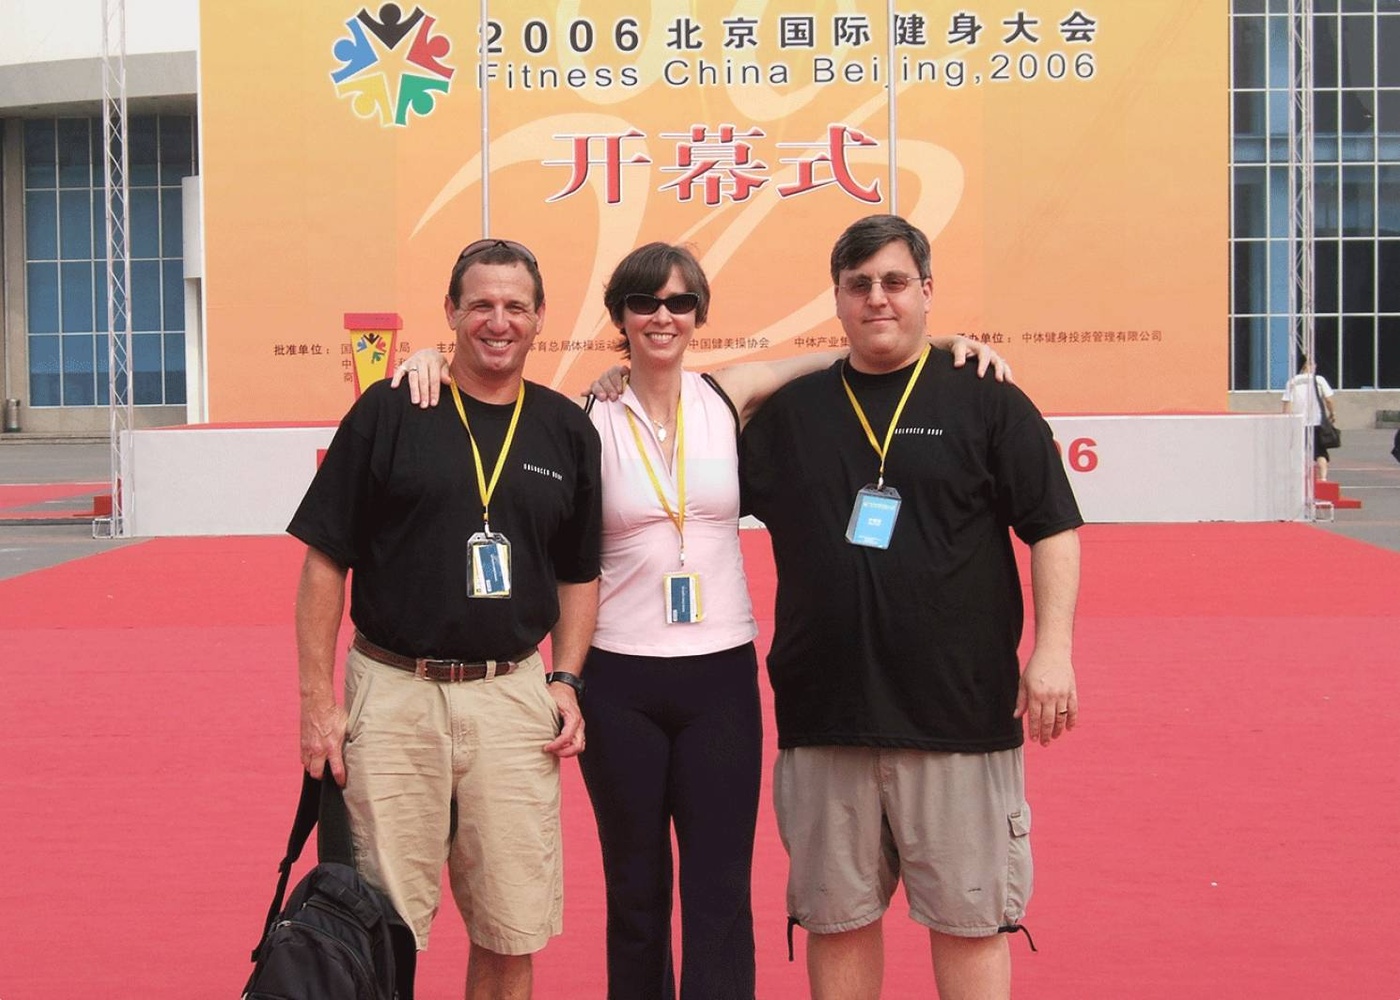 Dave, Nora and. Al in China